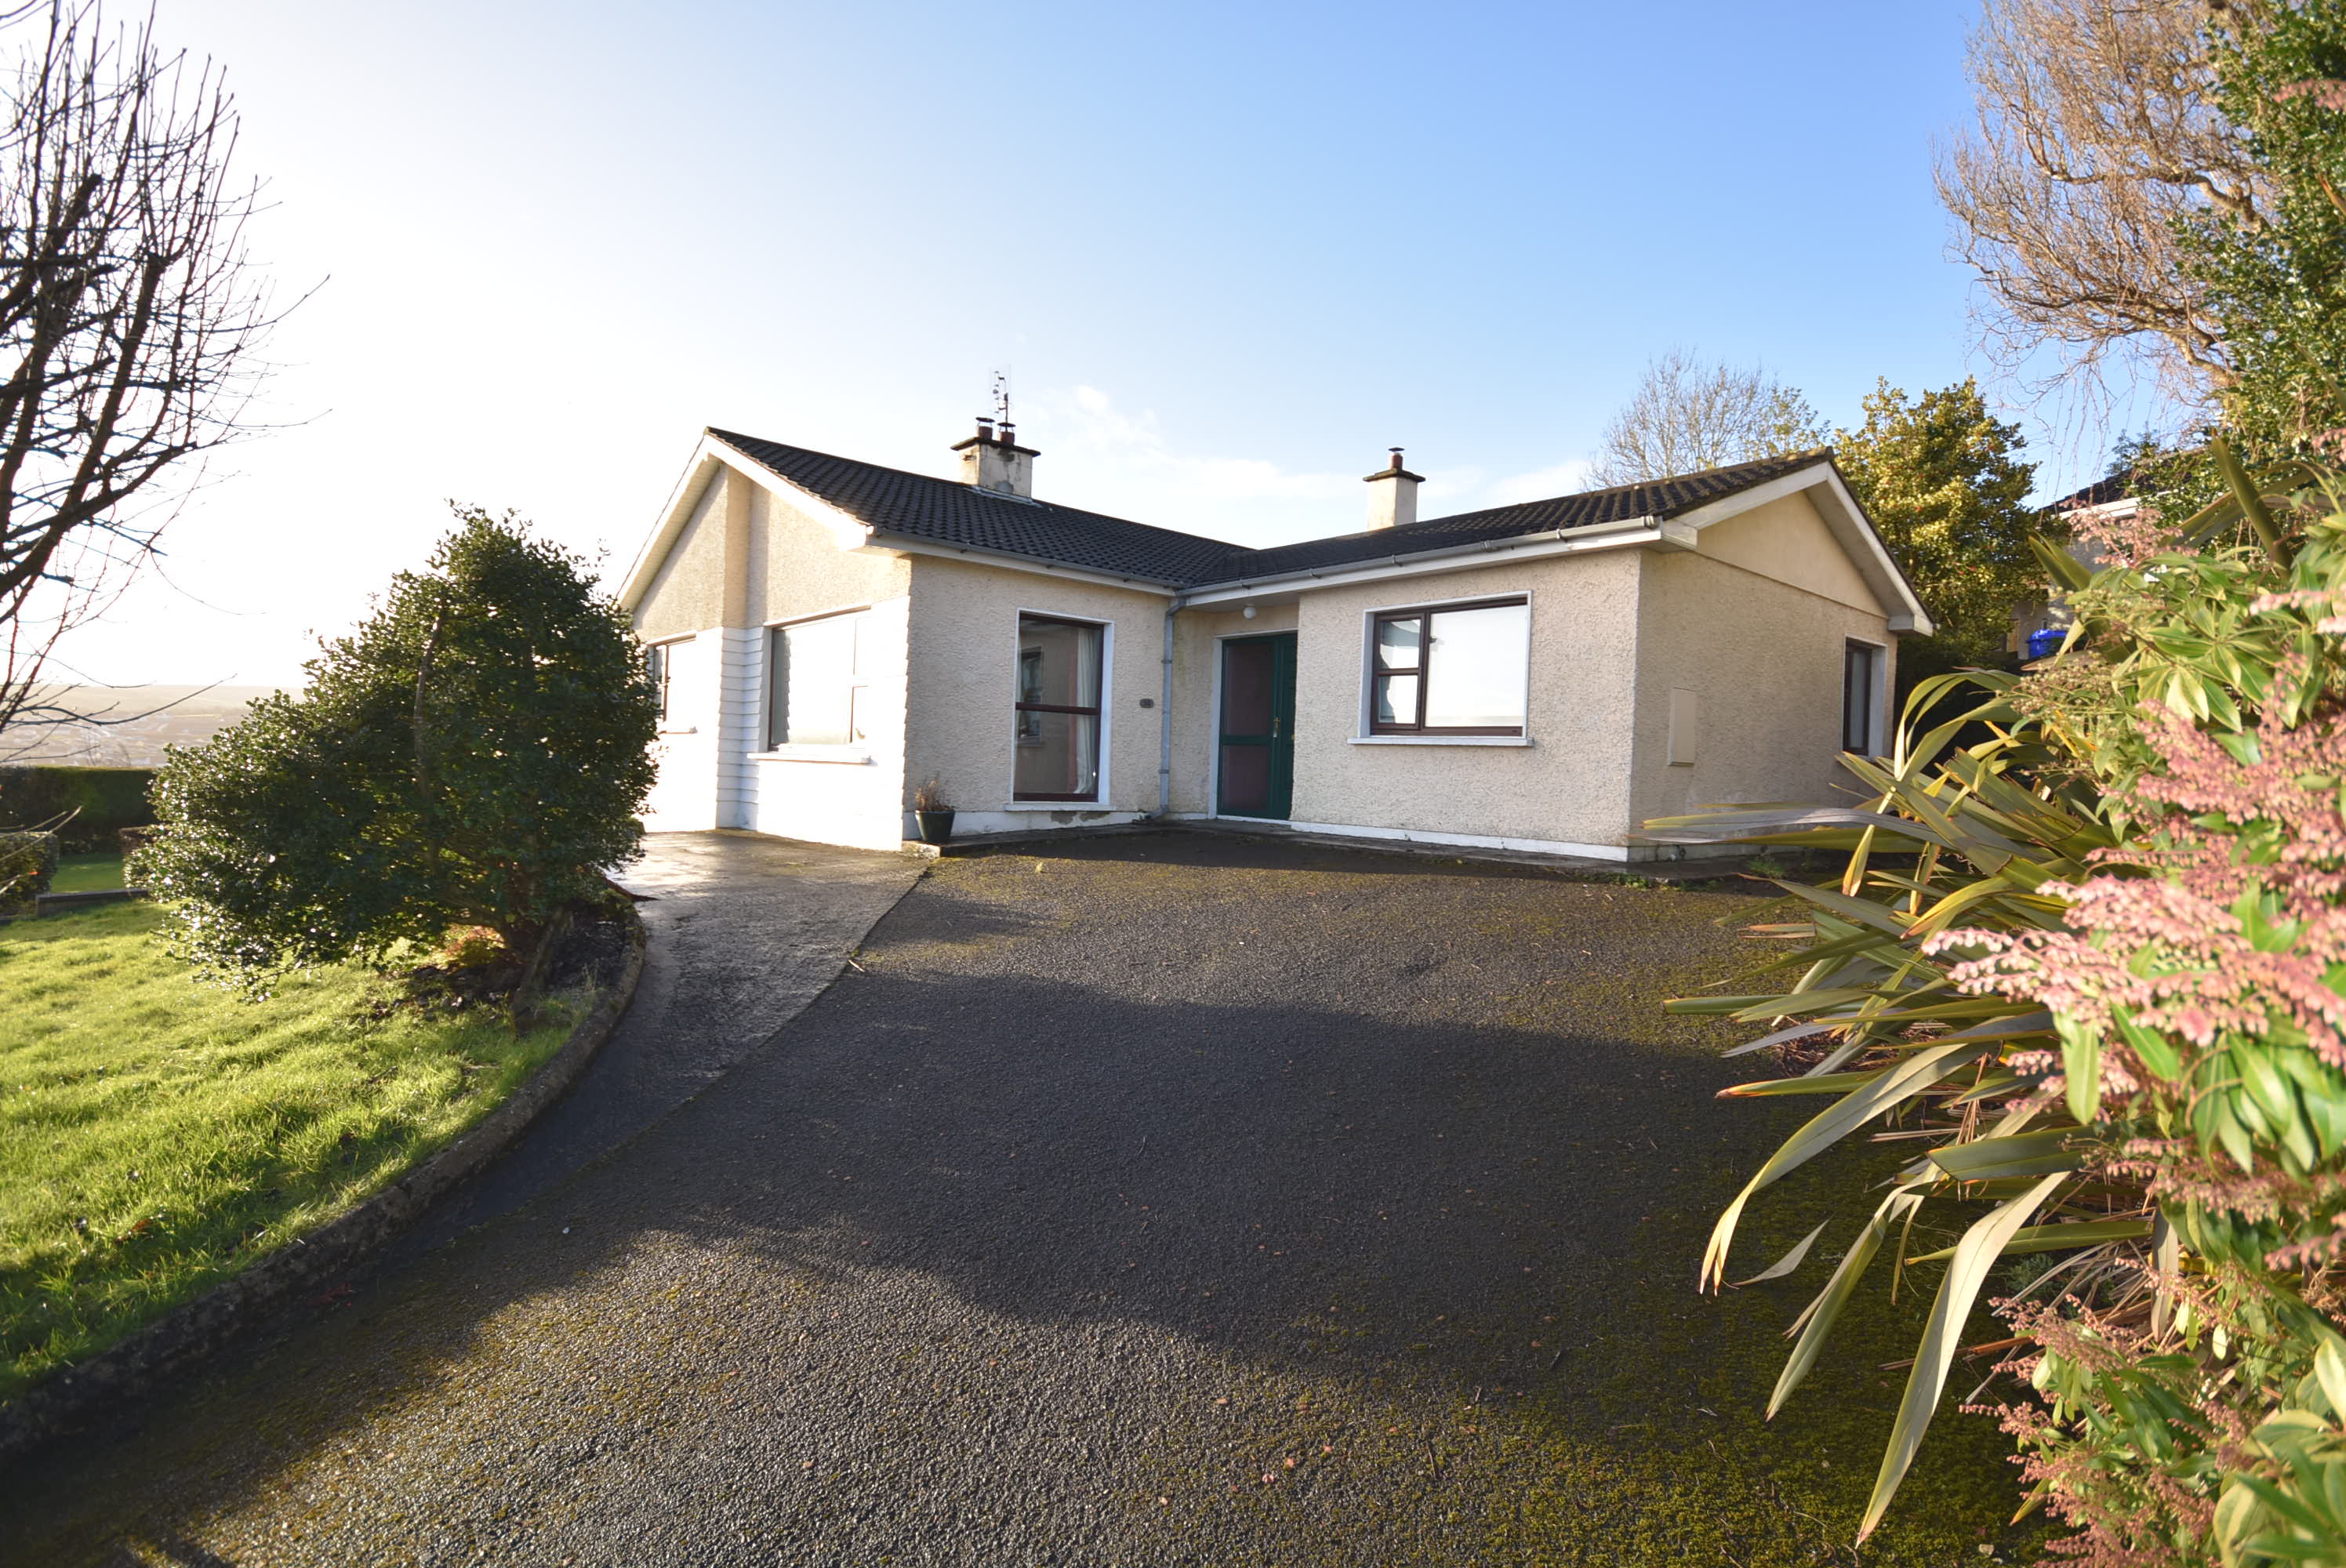 56 Hawthorn Heights, Letterkenny, Co. Donegal, F92 PR2H